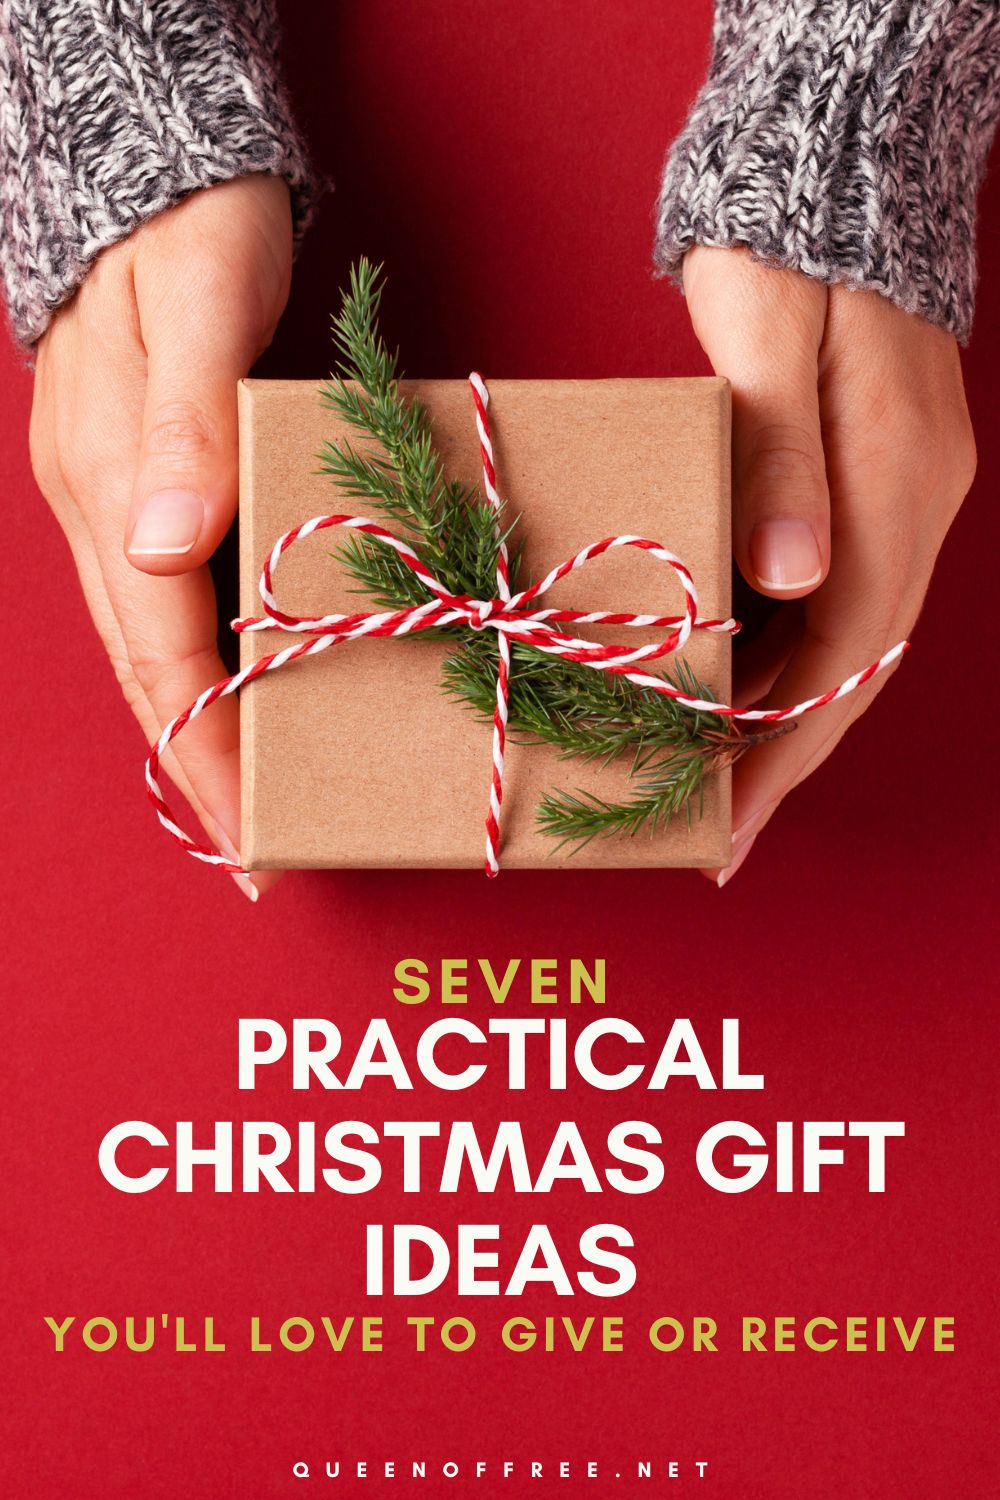 Skip the knick knacks and future clutter! Give or put on your wish list something you'll really use - these 7 Practical Christmas Gift Ideas.